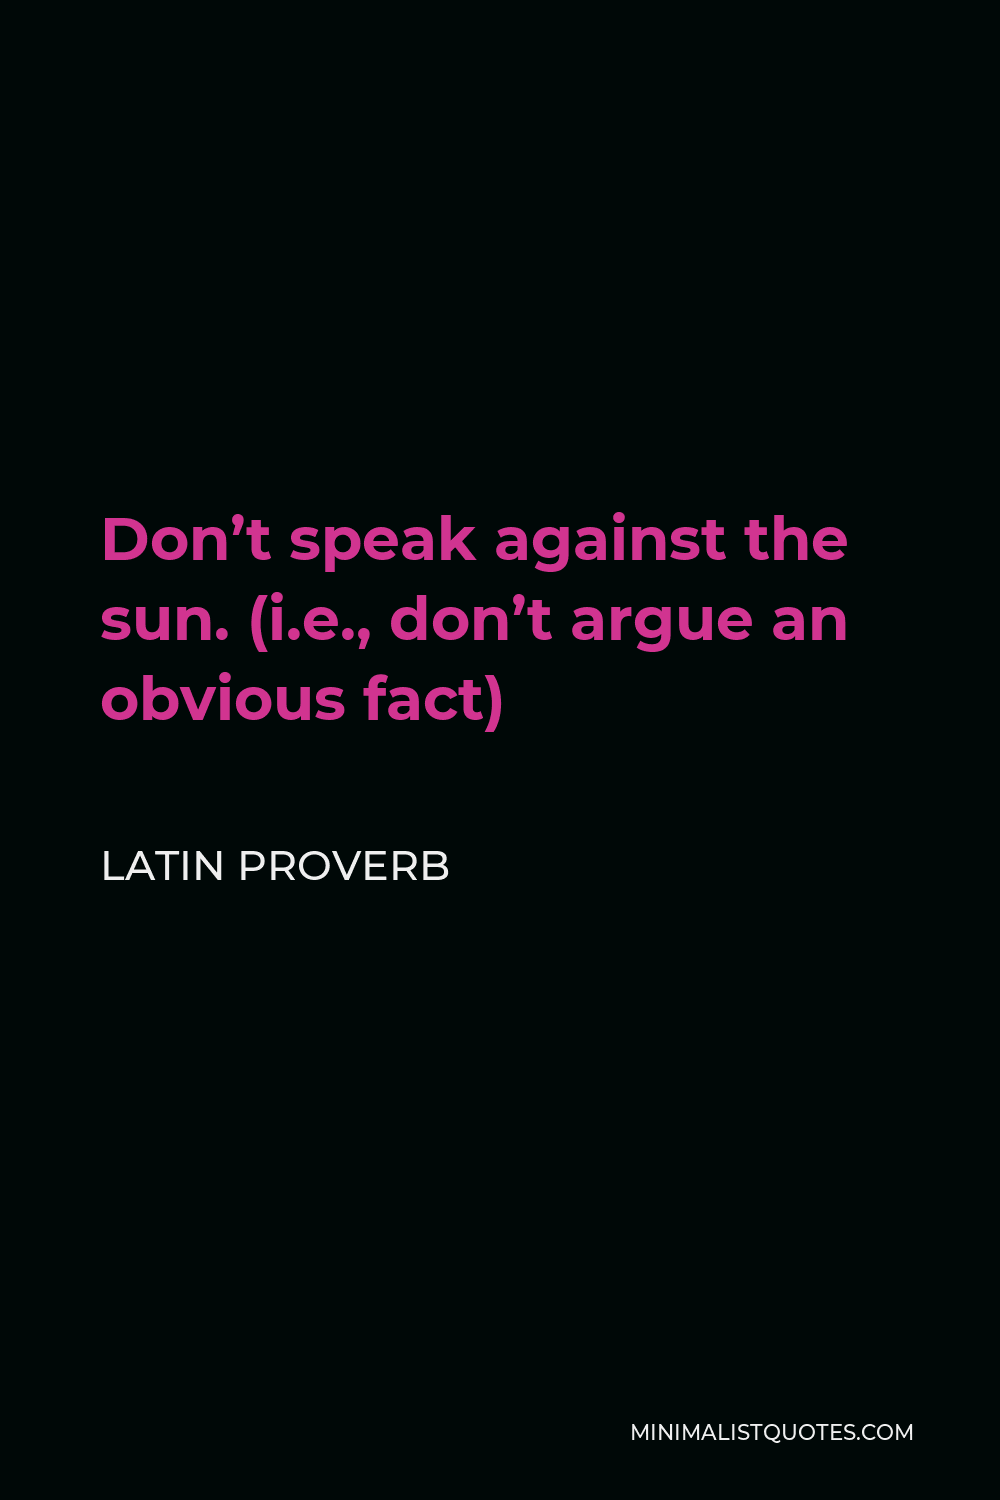 Latin Proverb Quote - Don’t speak against the sun. (i.e., don’t argue an obvious fact)